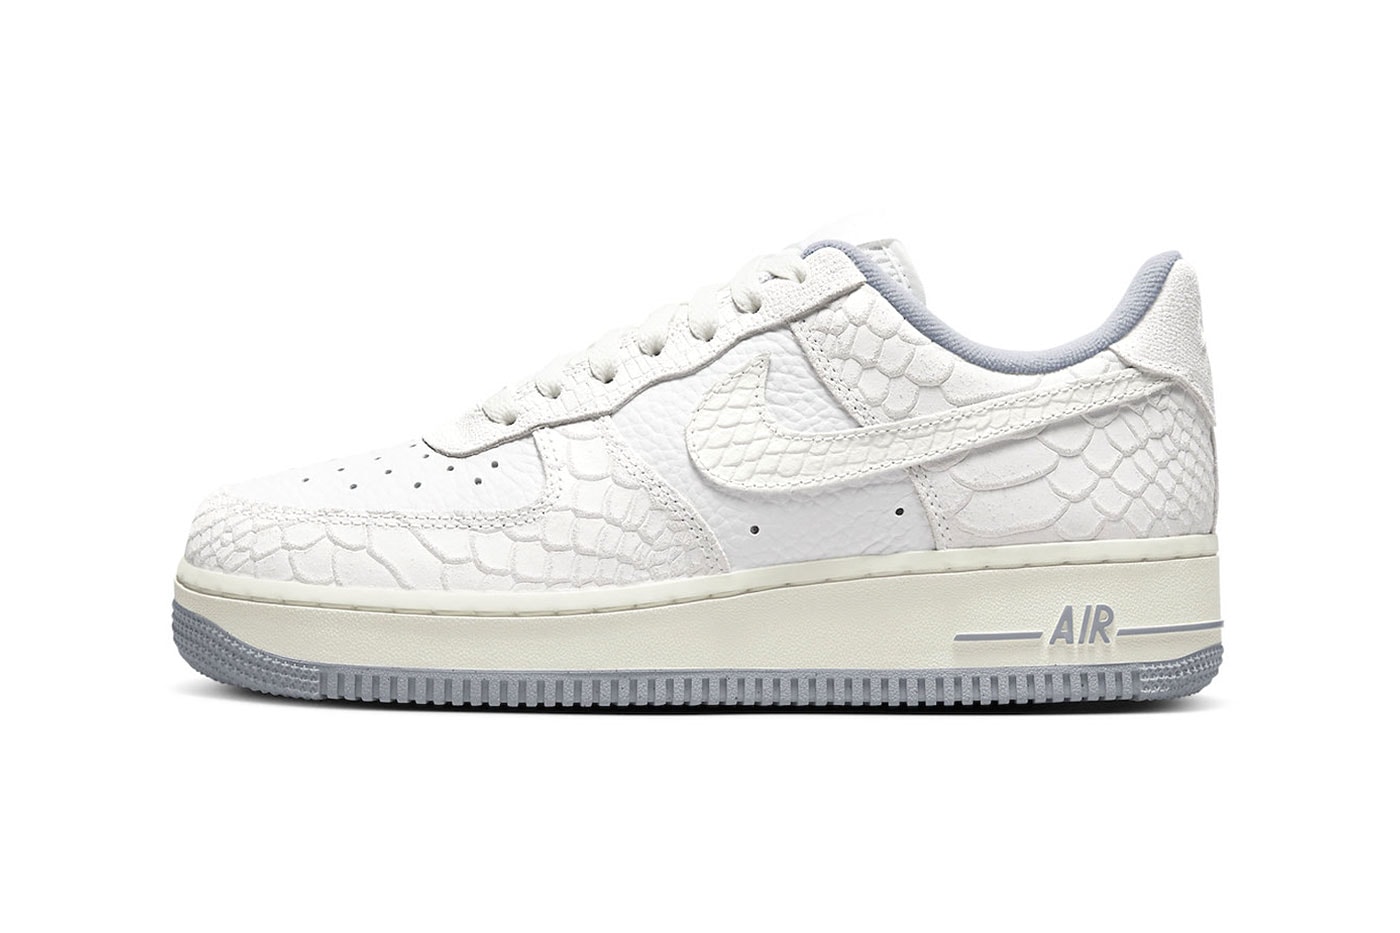 Take a Look at the Official Images of the Nike Air Force 1 Low "White Python" DX2678-100 crisp af1 shoes leather speckled grey suede